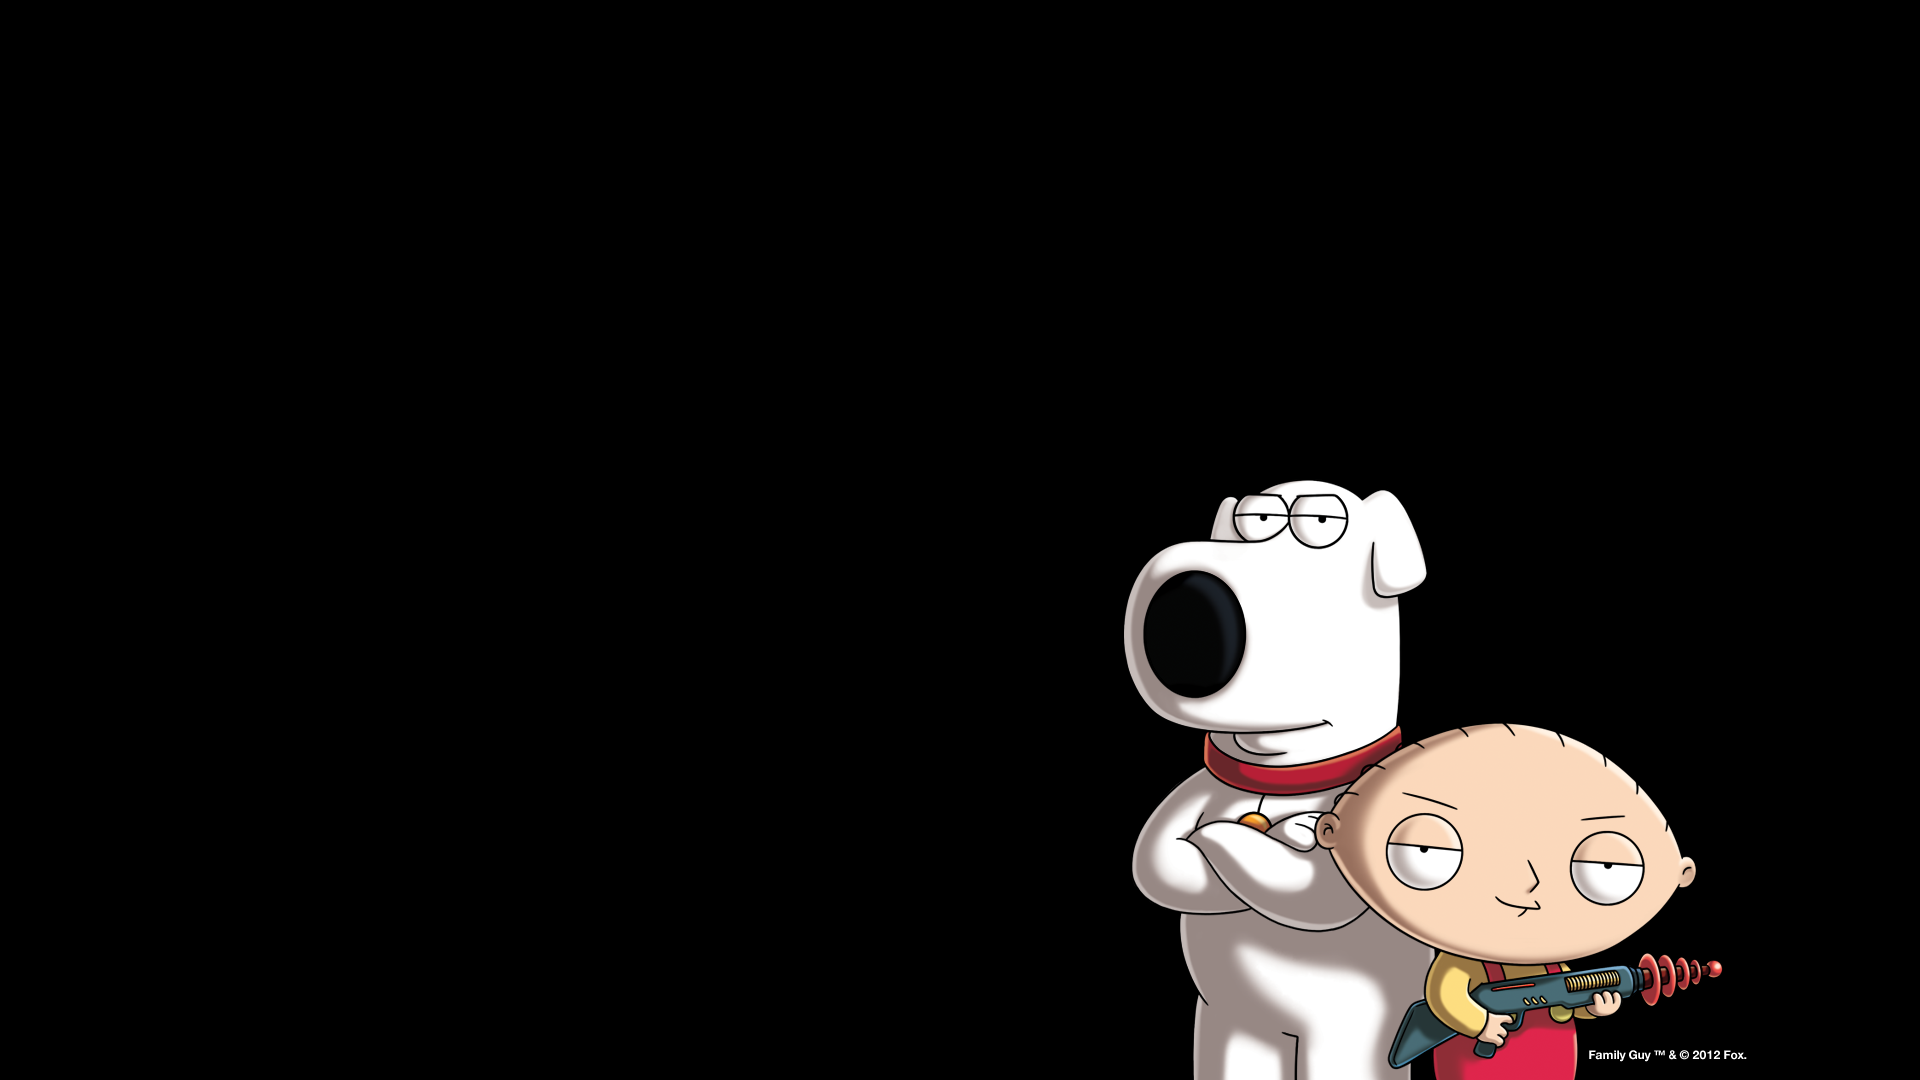 Family Guy Family Guy Back To The Multiverse Video Games Stewie Griffin 1920x1080